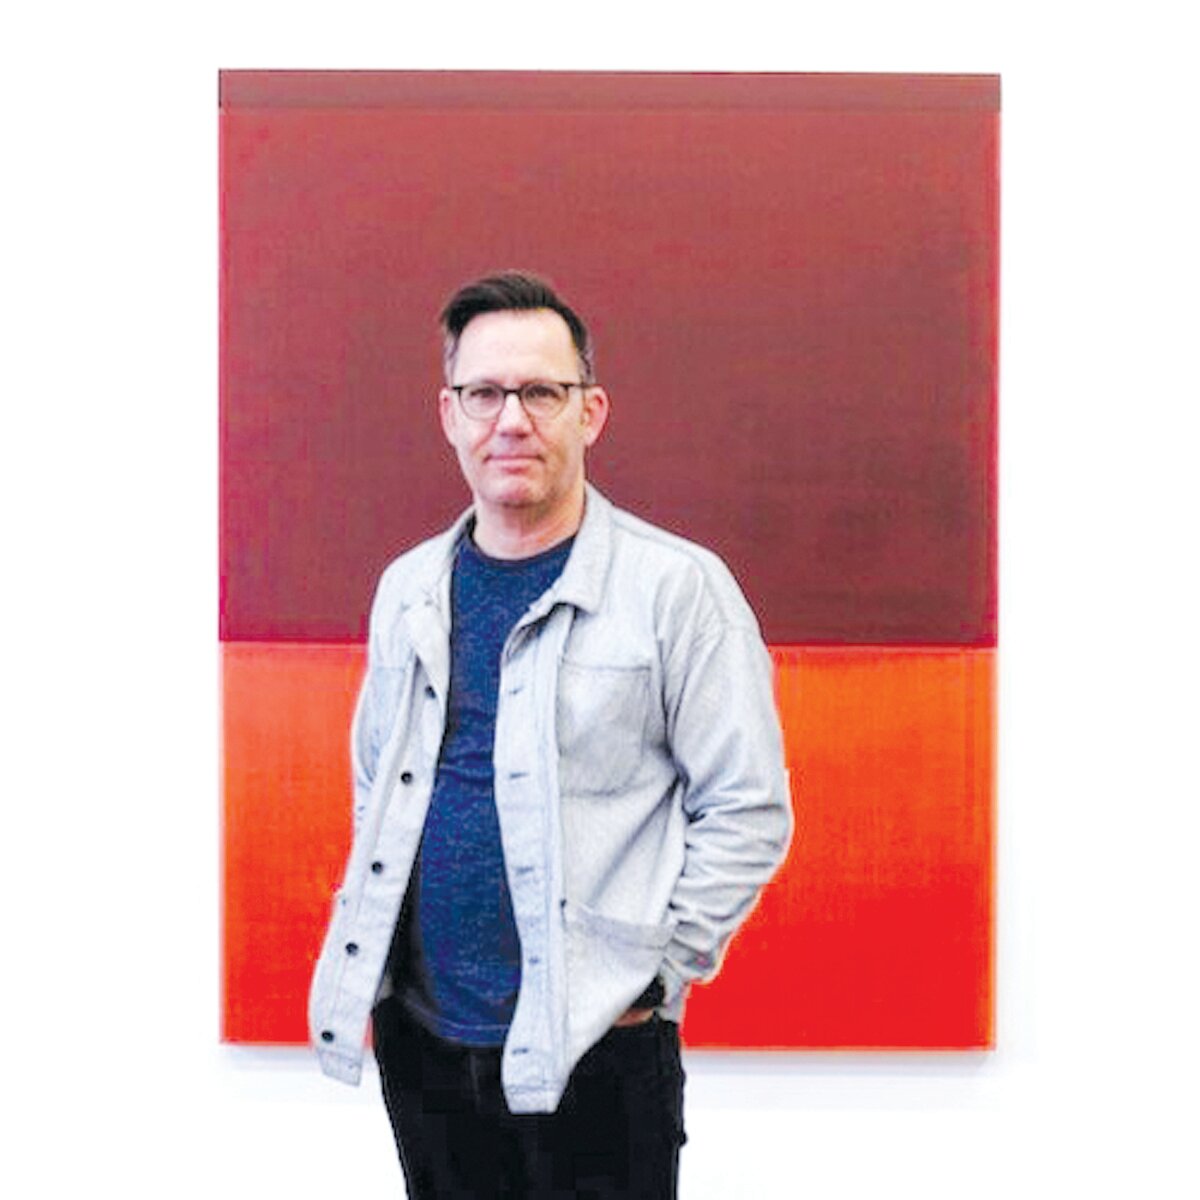 Abstract artist Douglas Witmer will deliver the Distinguished Lecture at Mercer County Community College’s West Windsor Campus Feb. 7, followed by an opening reception for his exhibit “Currents” at The Gallery at Mercer.